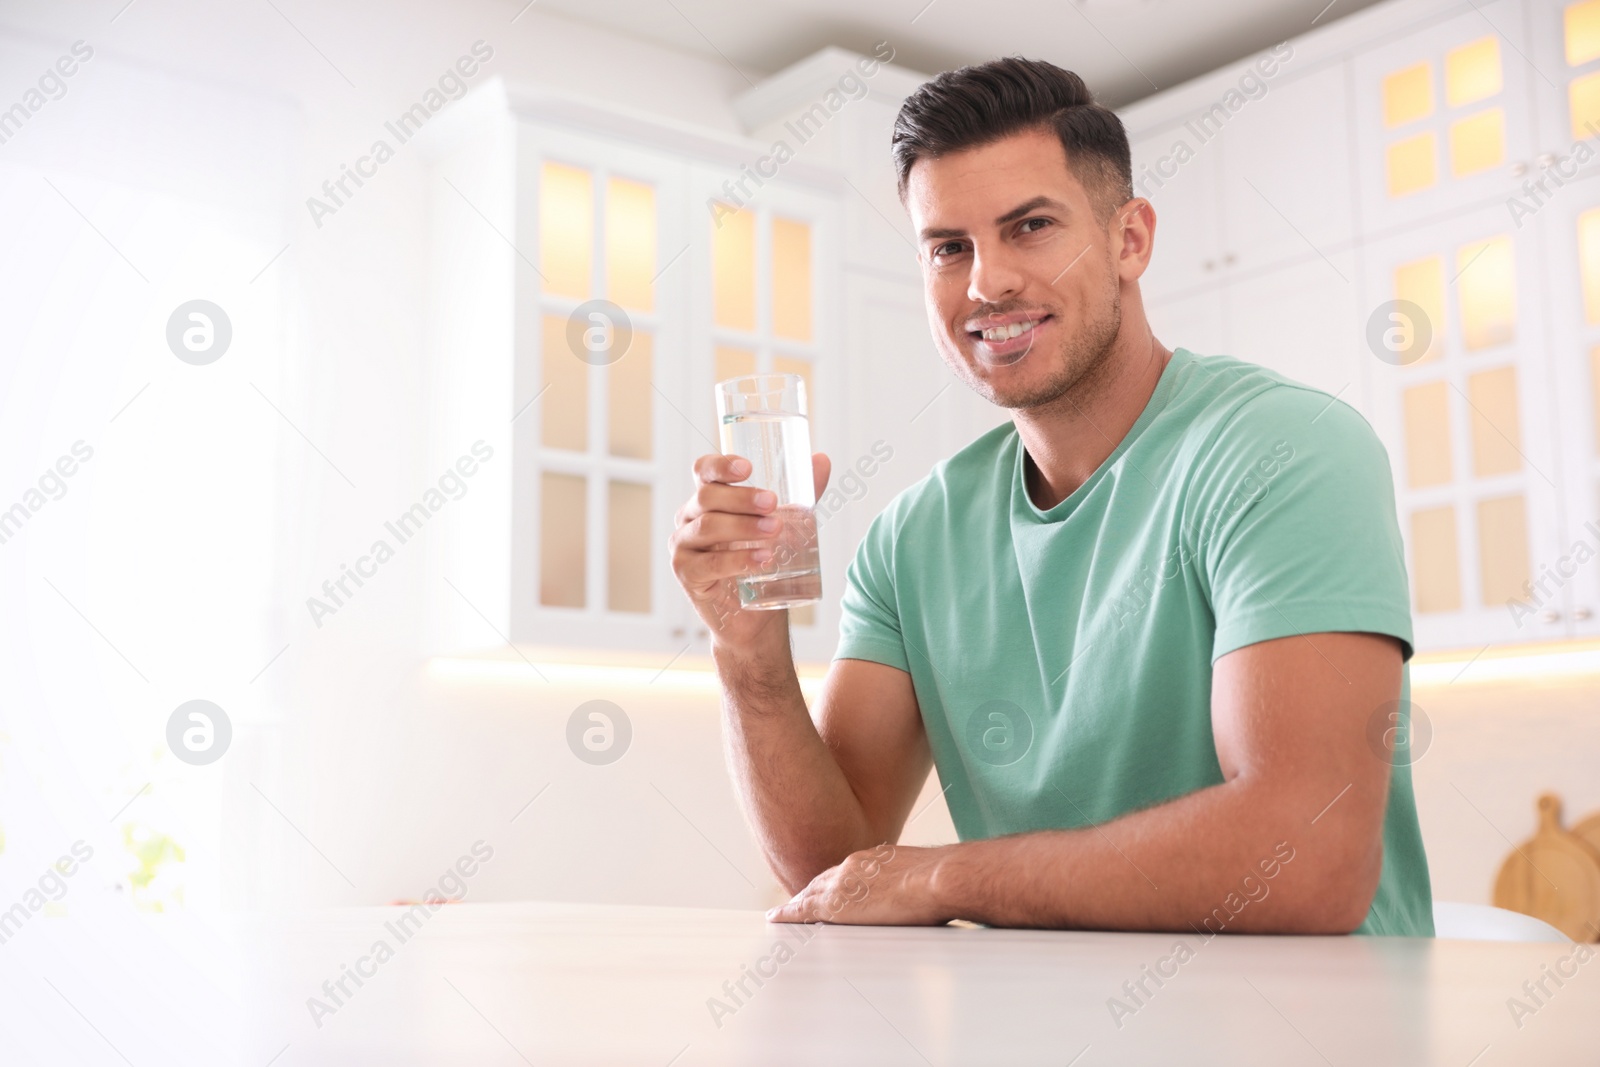 Photo of Man holding glass of pure water at table in kitchen. Space for text